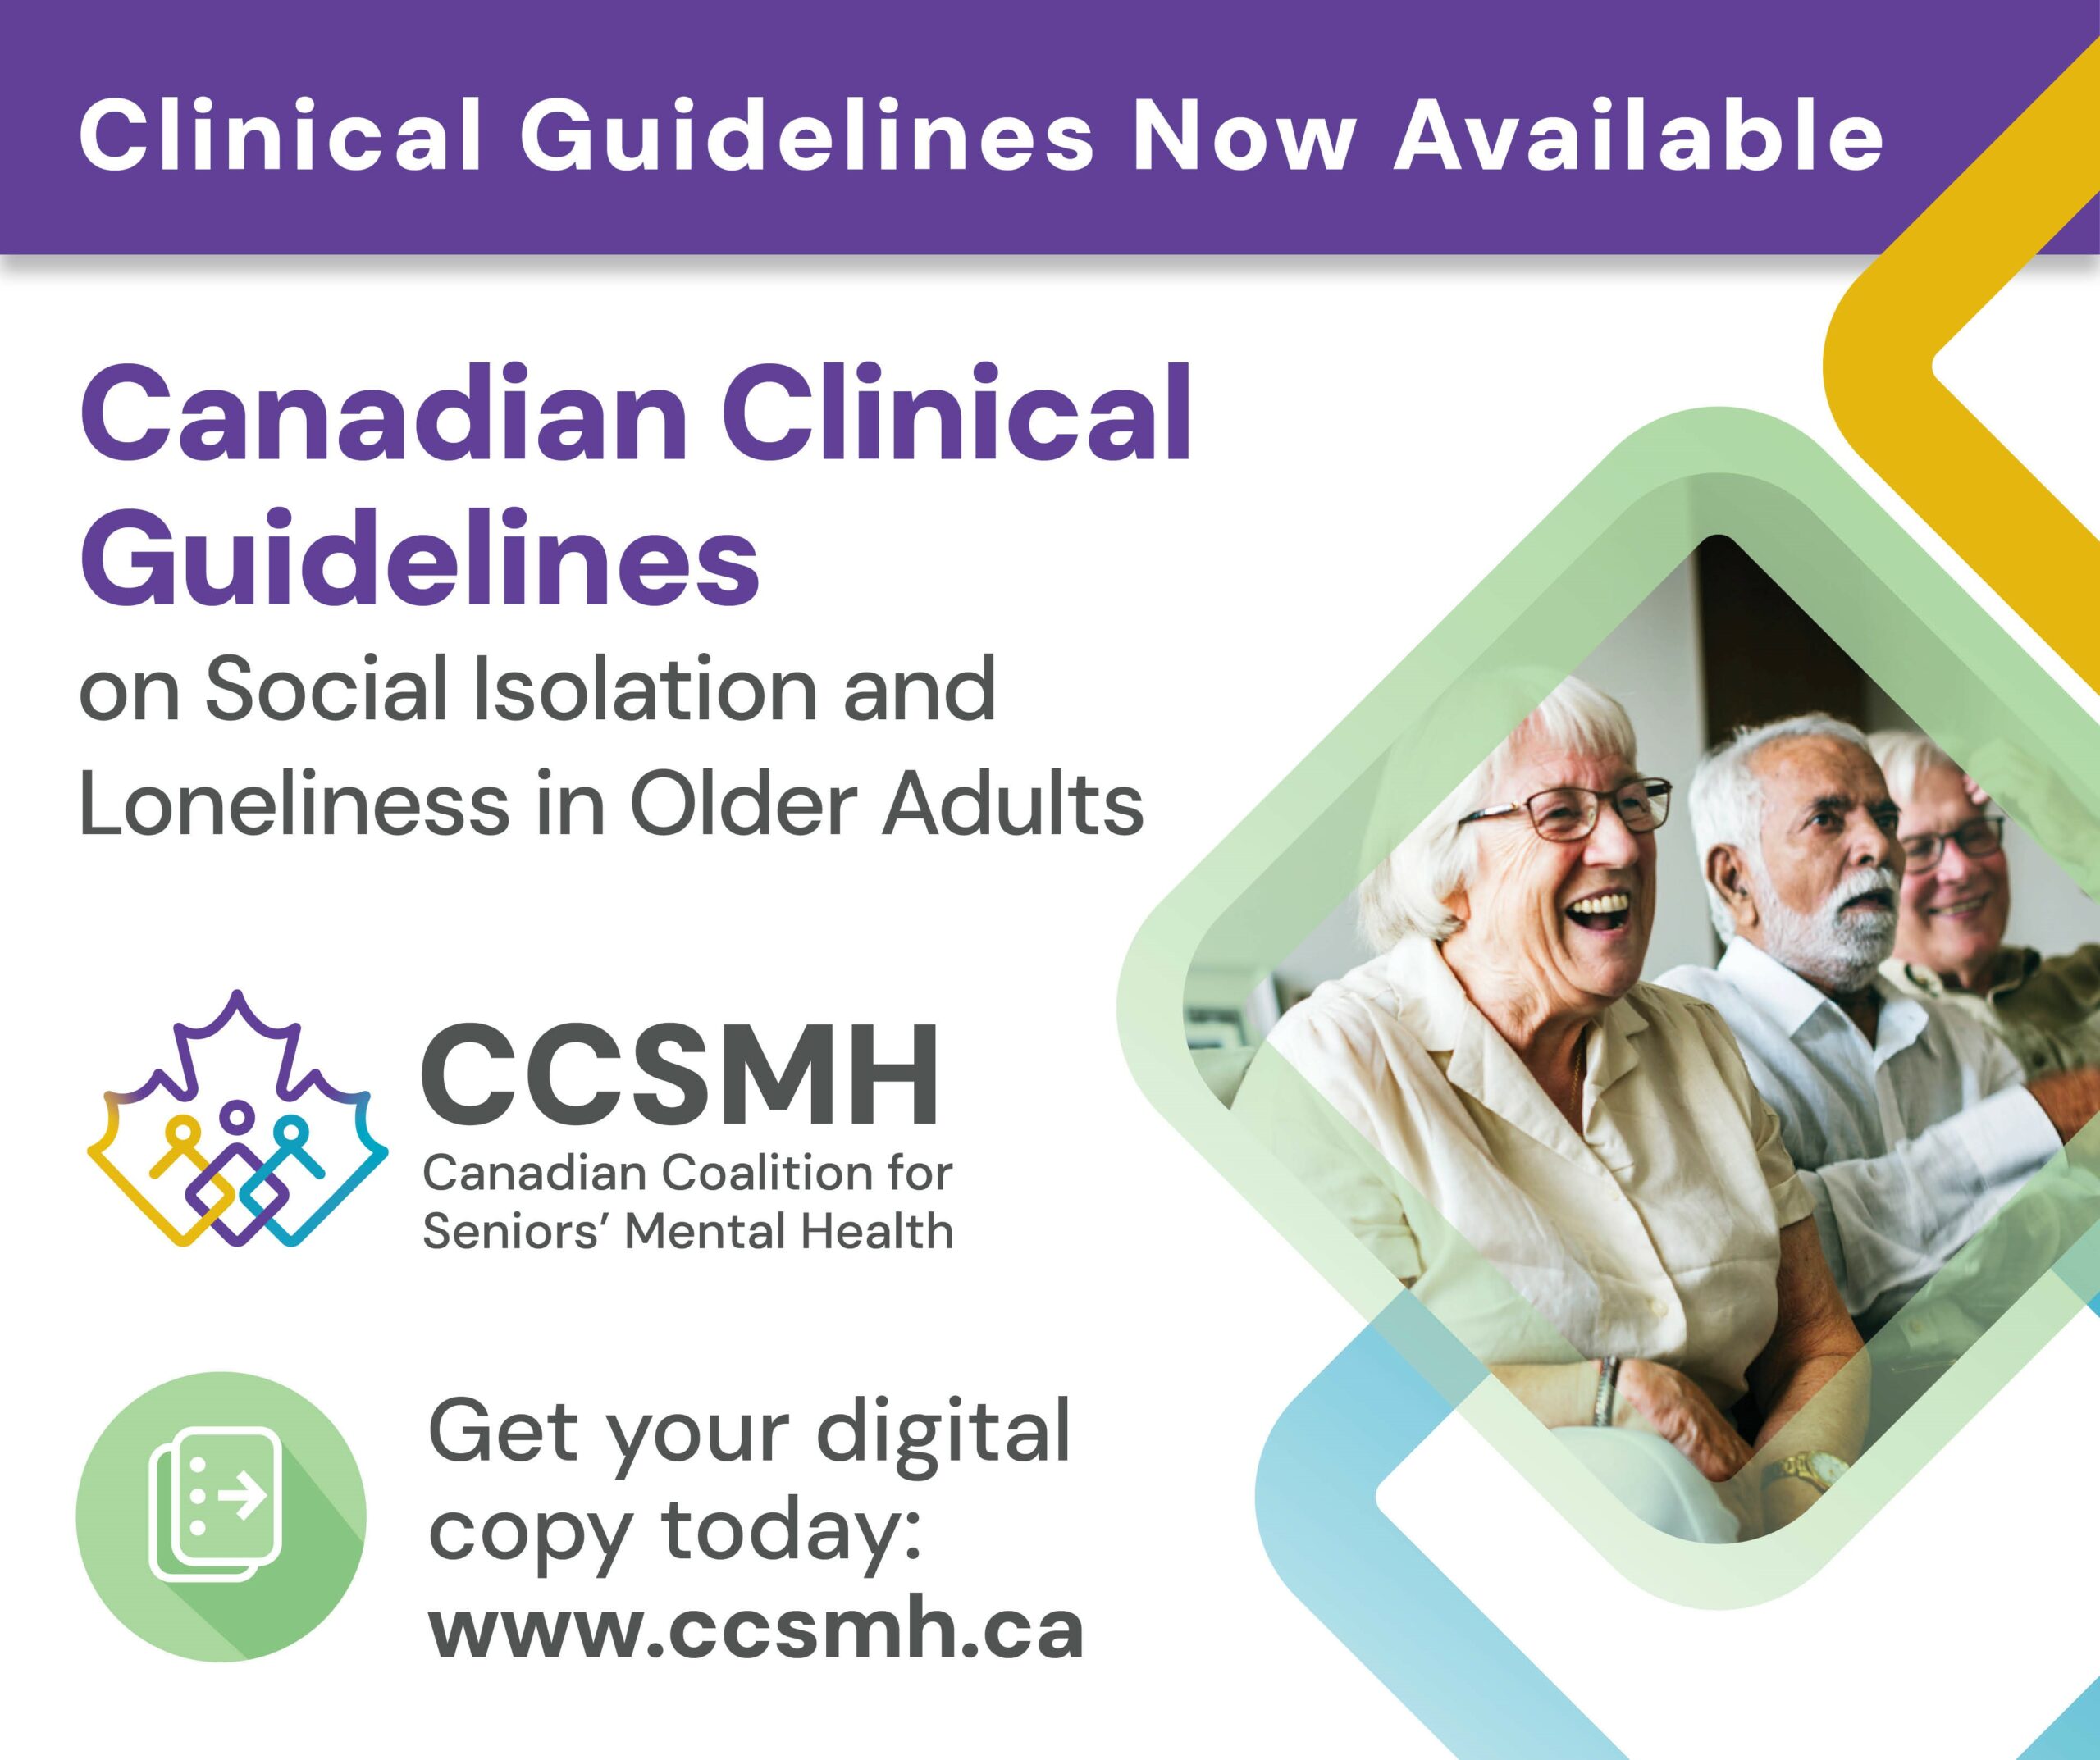 Now available: Canadian Clinical Guidelines on Social Isolation and Loneliness